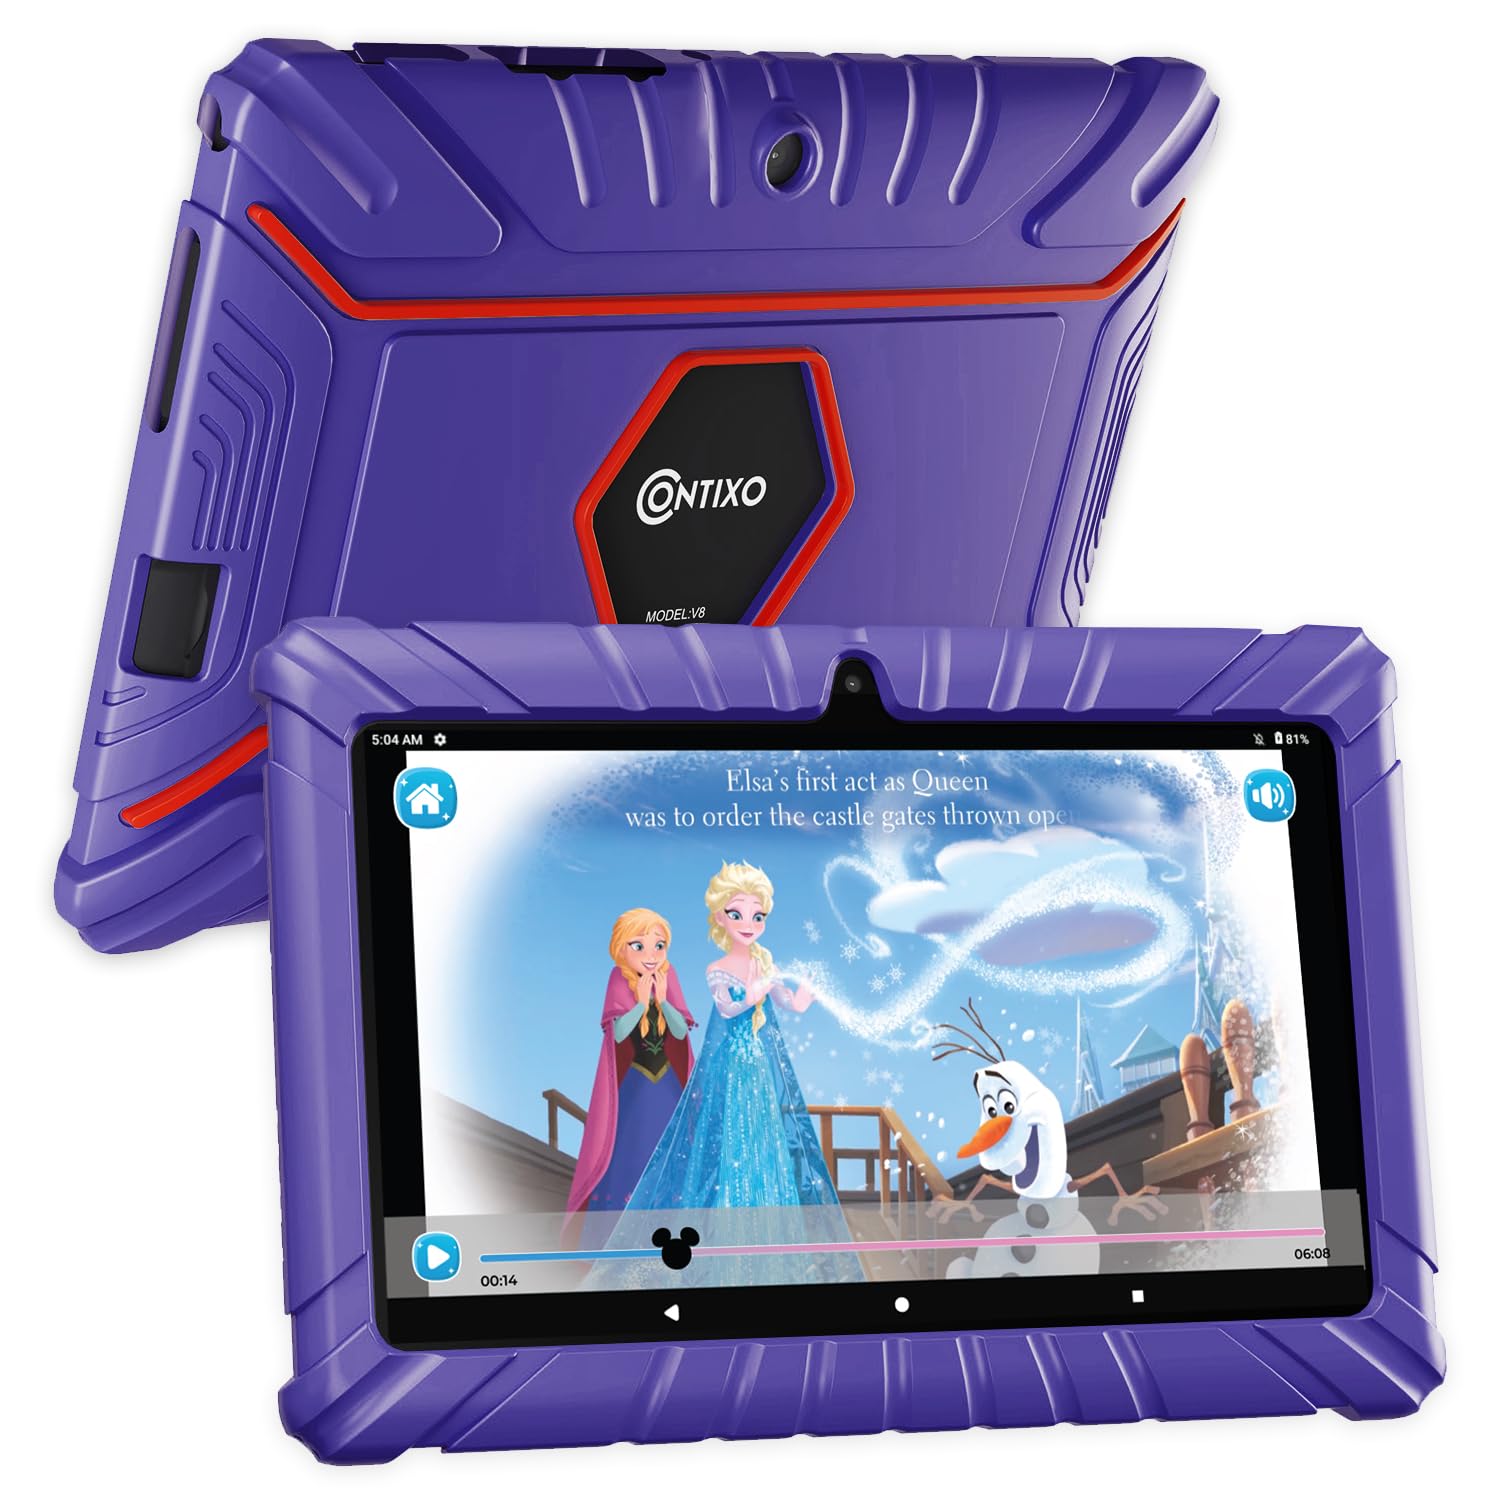 Contixo Kids Tablet, V8 Tablet for Kids and Tablet Sleeve Bag Bundle, 7” Toddler Tablet, 2GB+32GB Android 11 Tablet with Case, Learning Games Included, Parental Control Family Link - Purple